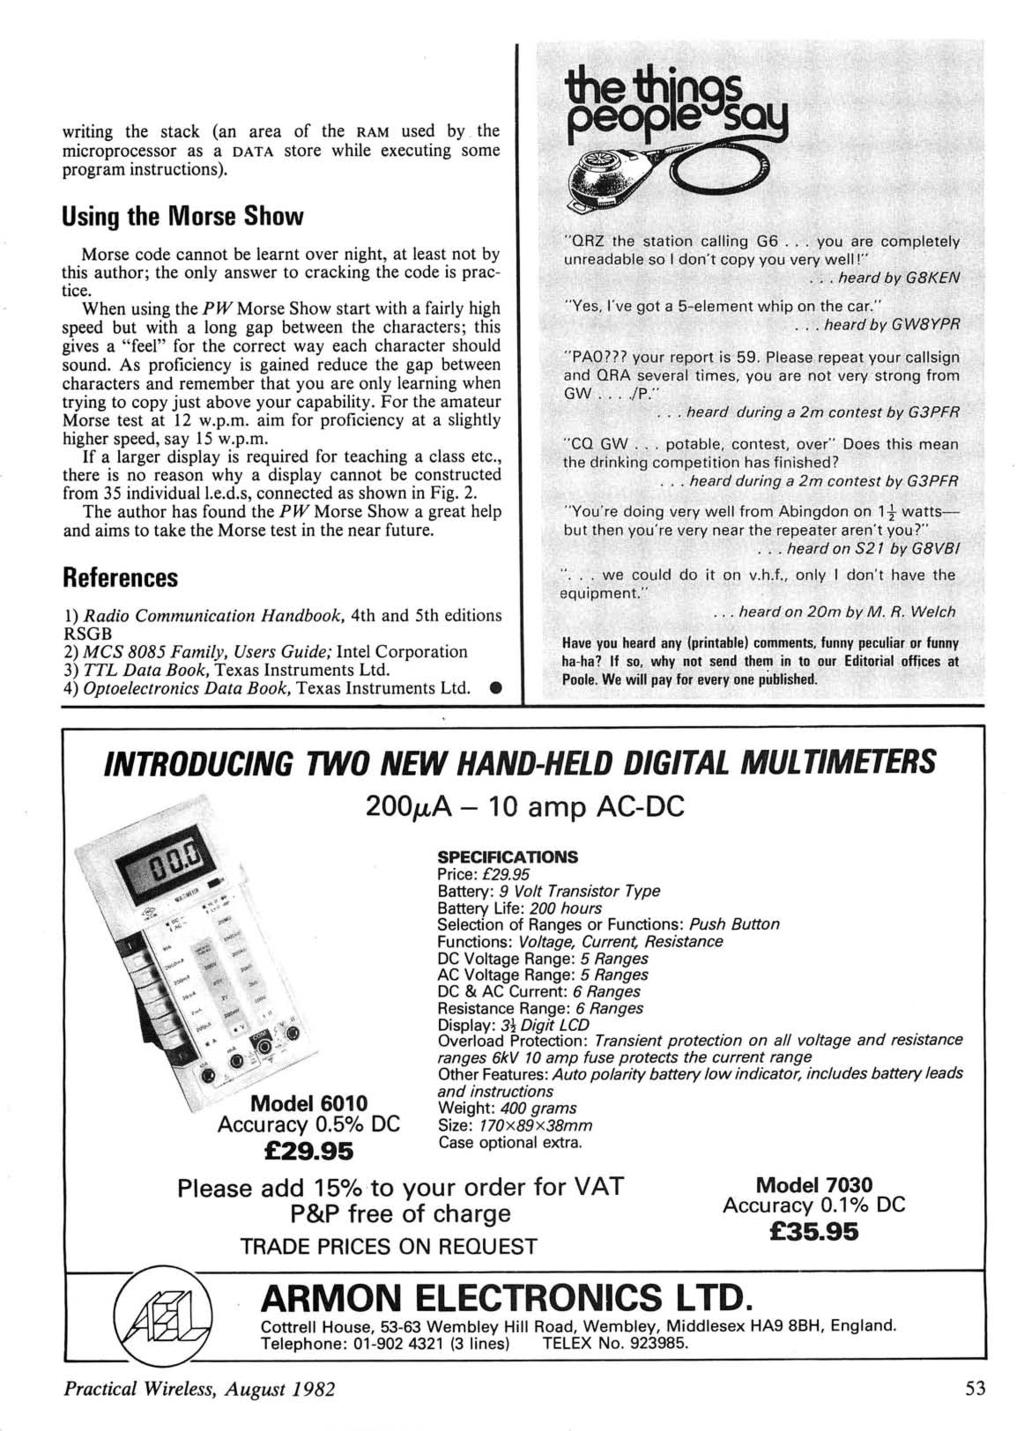 www.americanradiohistory.com writing the stack (an area of the RAM used by the microprocessor as a DATA store while executing some program instructions).